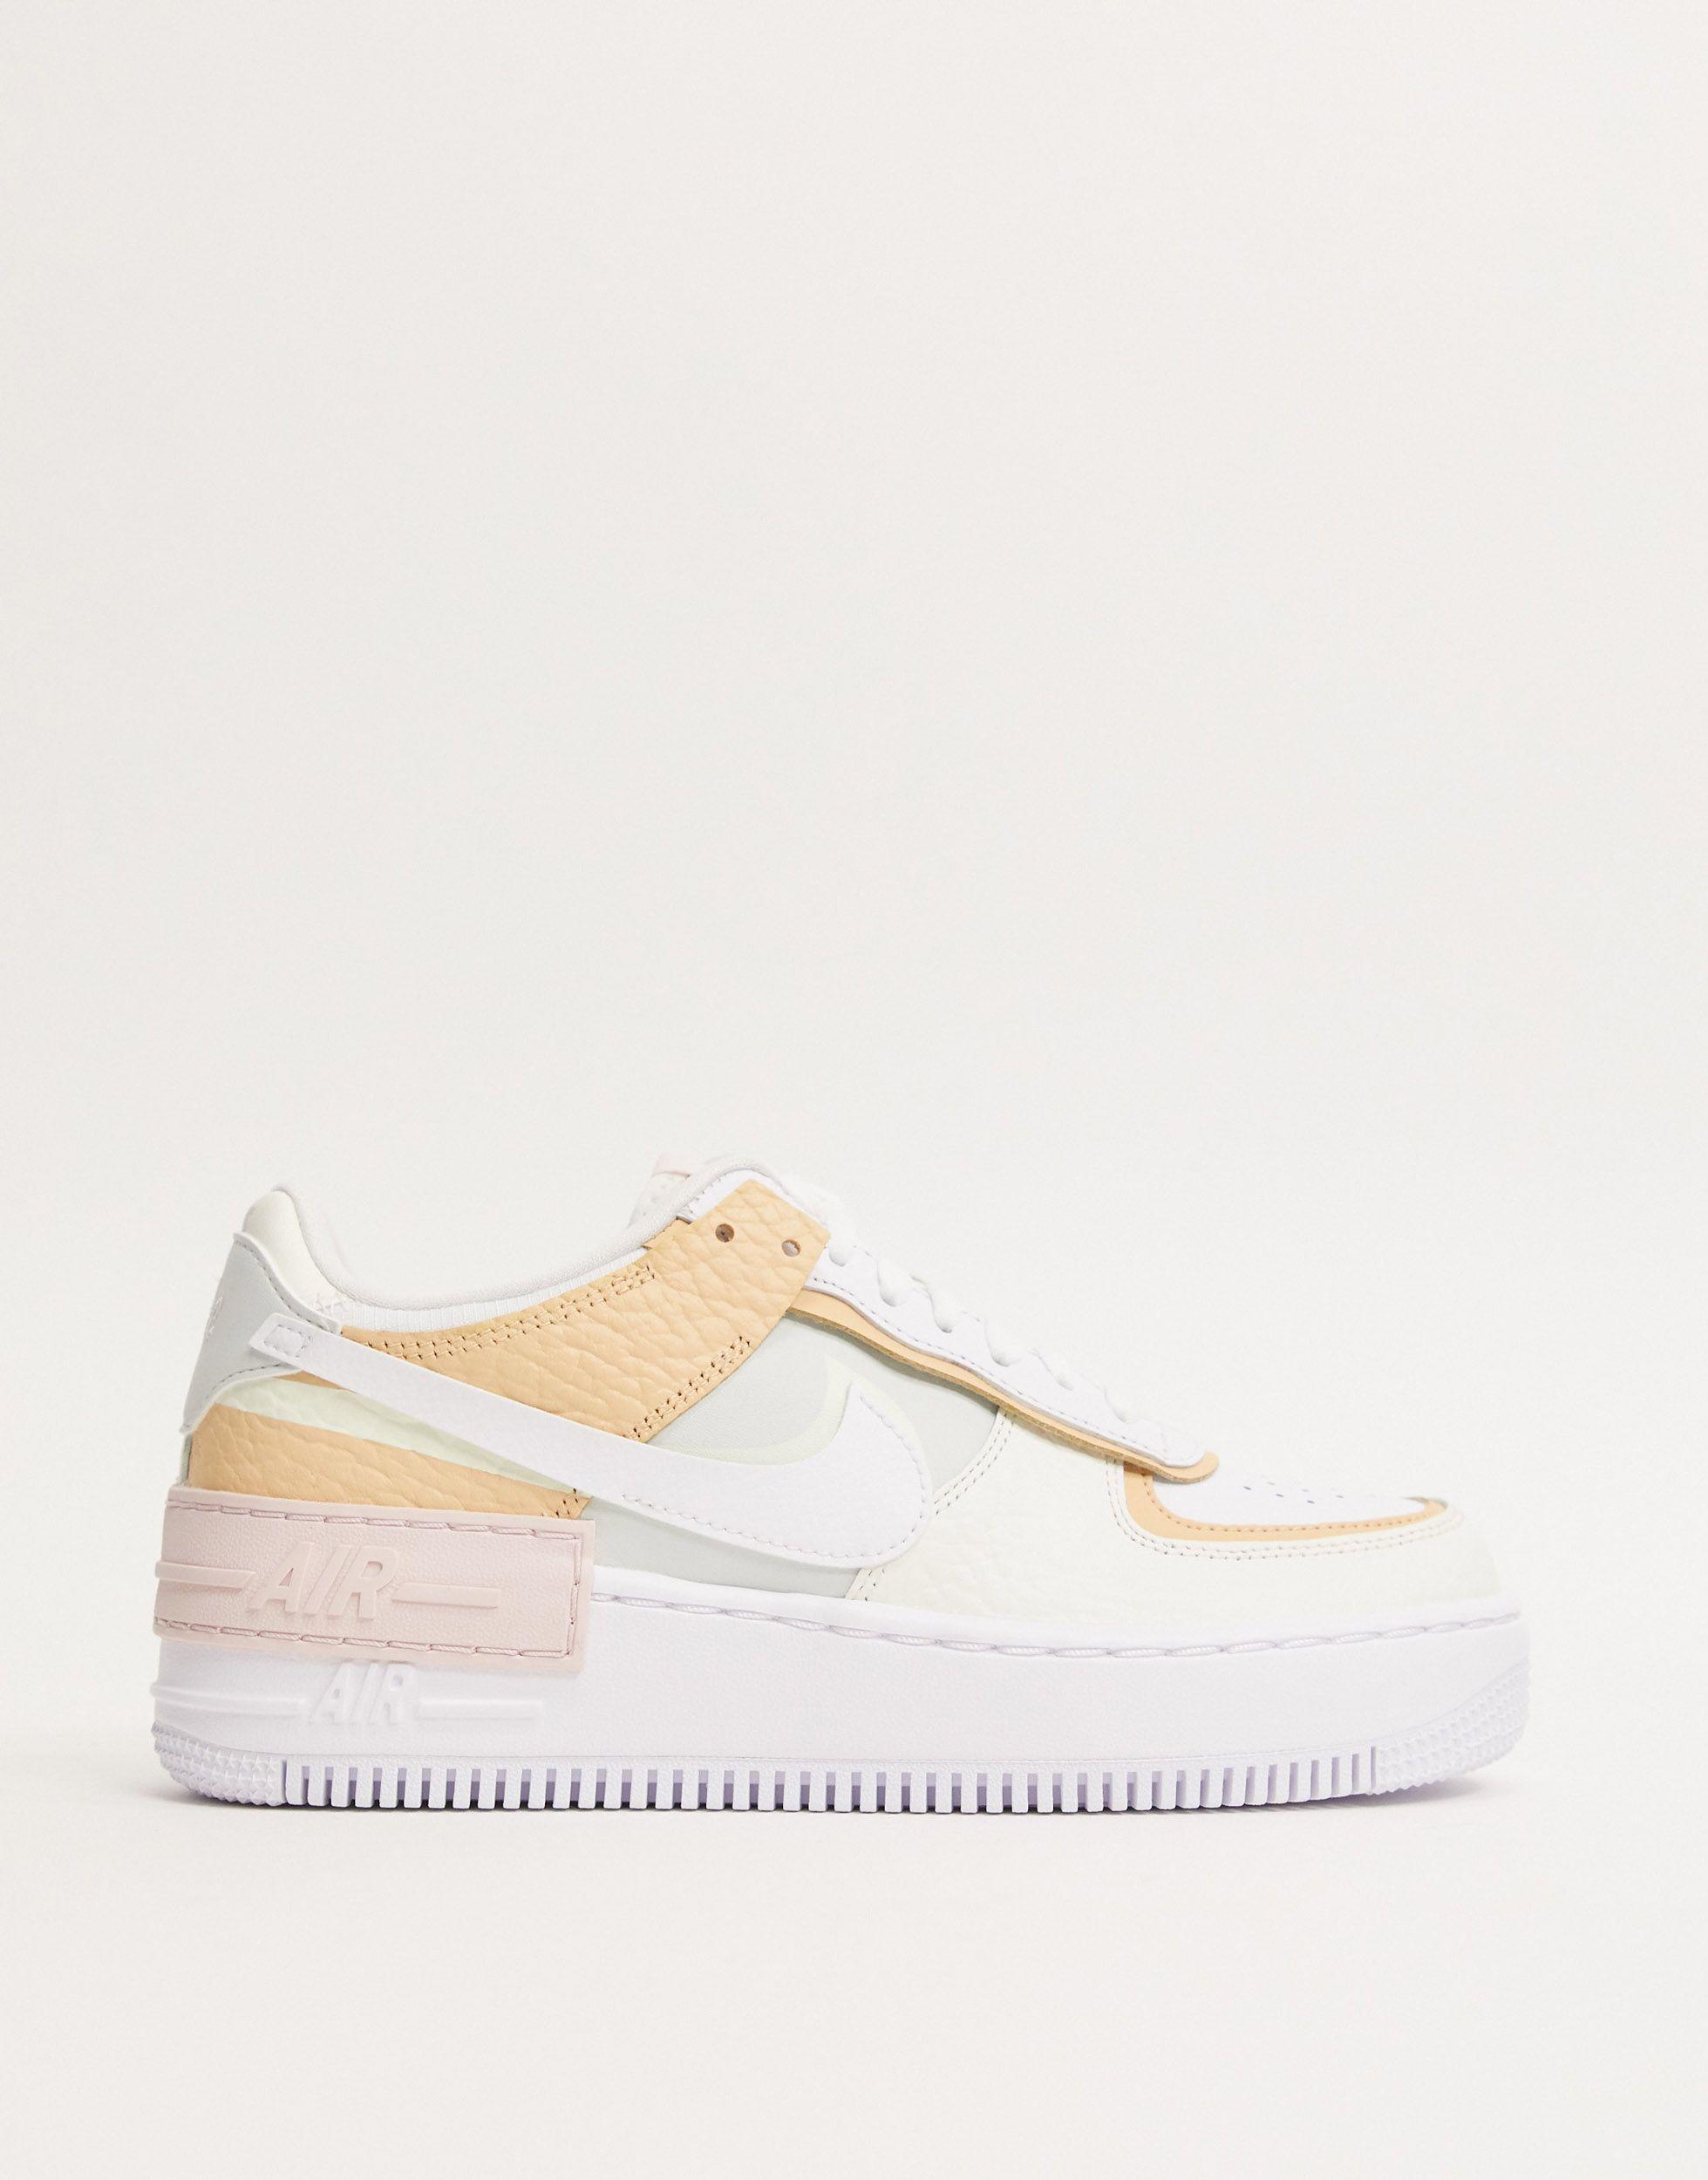 Nike Air Force 1 Shadow Tonal Cream And Orange Sneakers in Natural | Lyst  Canada